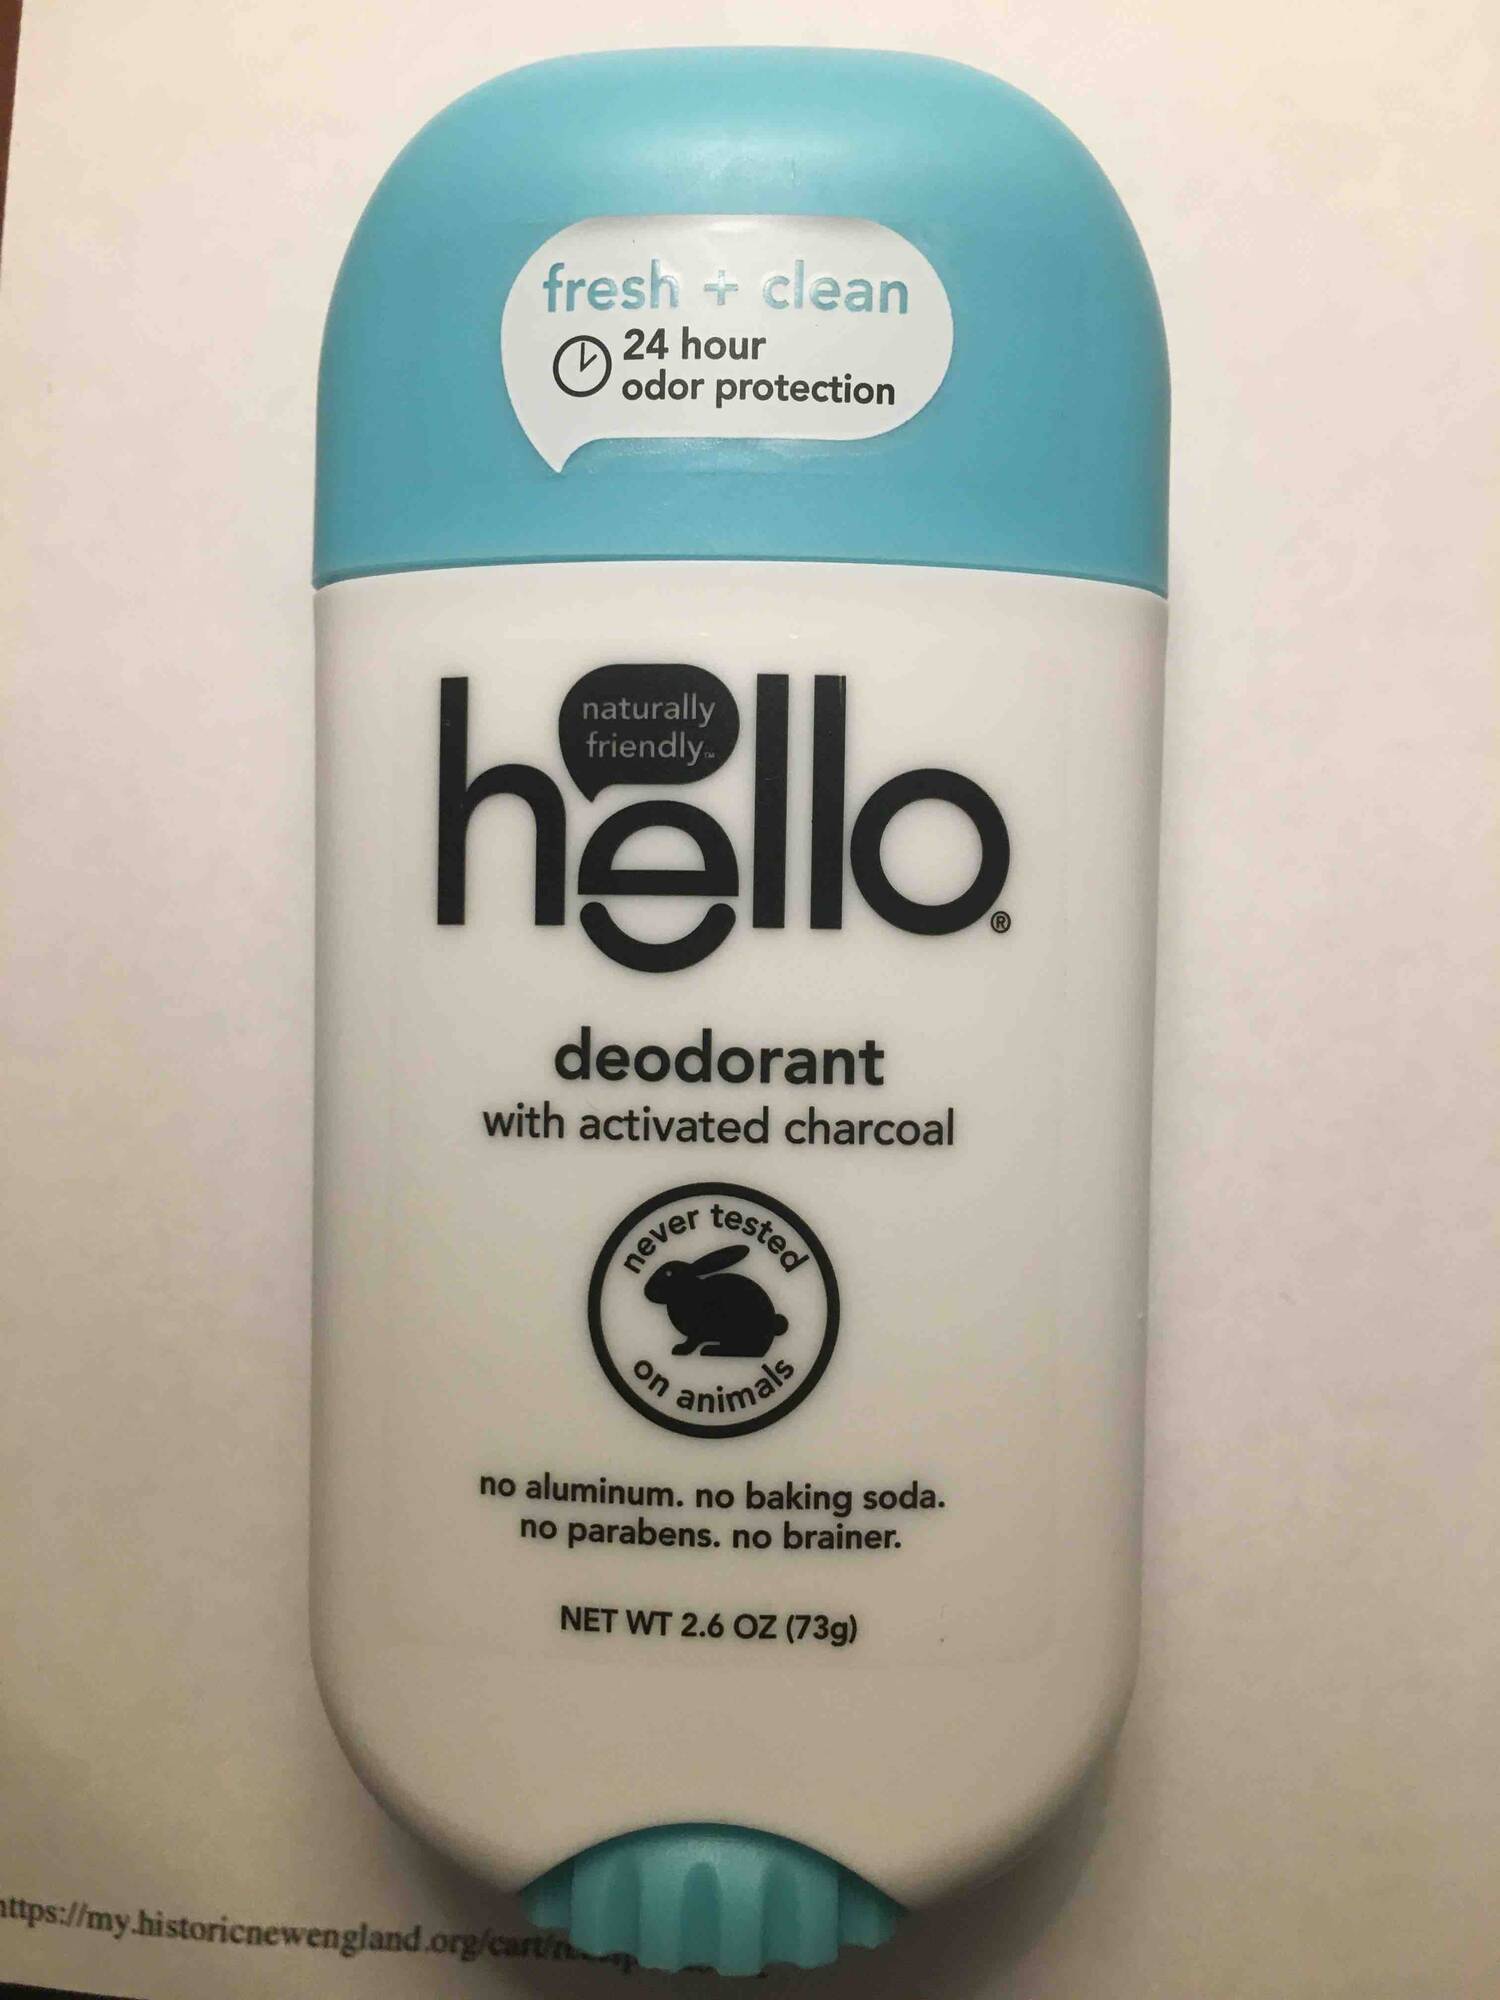 HELLO - Fresh + clean - Deodorant with activated charcoal 24h